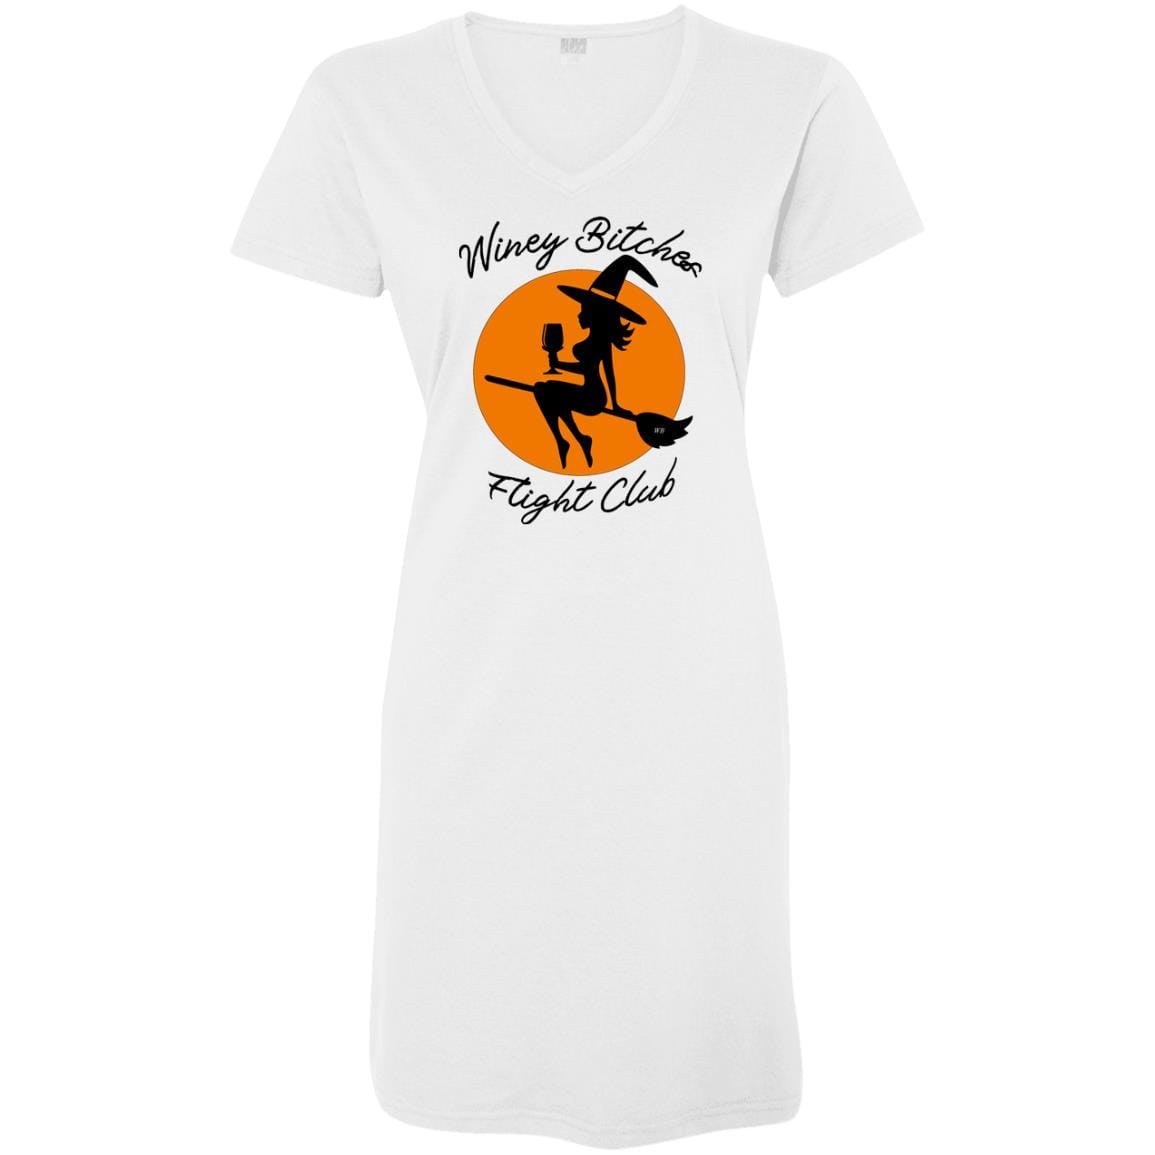 T-Shirts White / S/M WineyBitches.Co "Winey Bitches Flight Club" Ladies' V-Neck Fine Jersey Cover-Up WineyBitchesCo